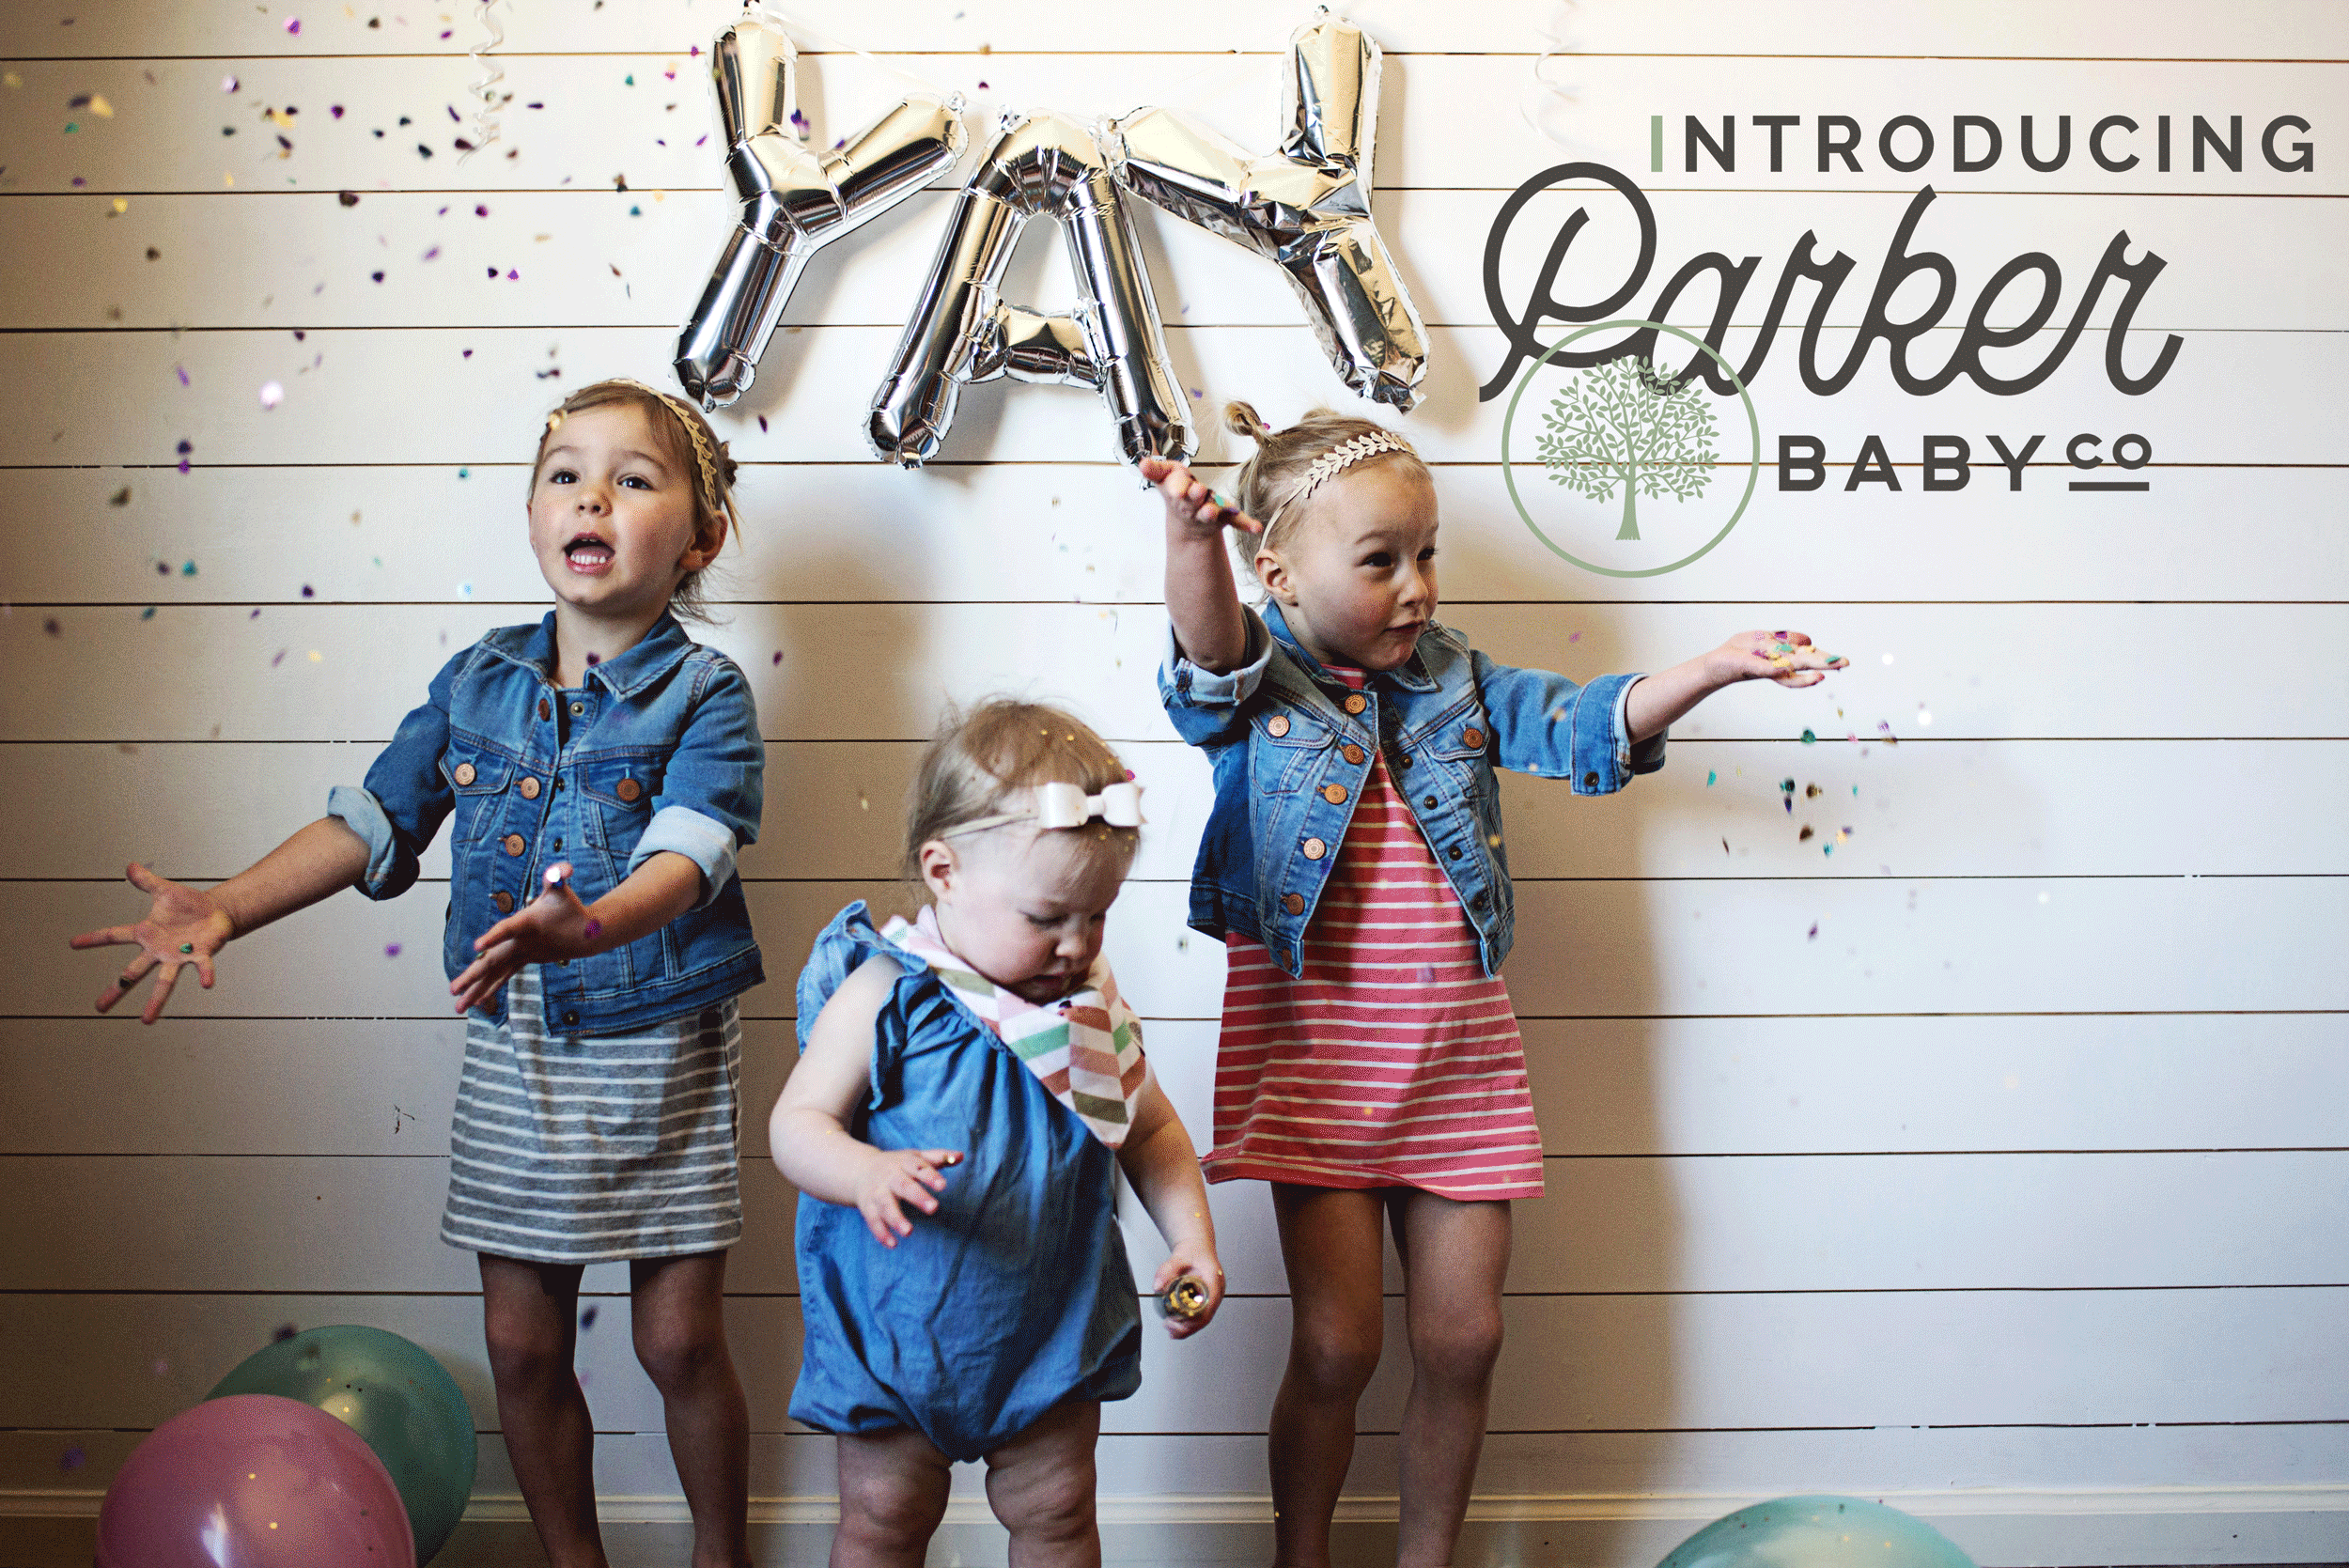 Introducing Parker Baby Co.